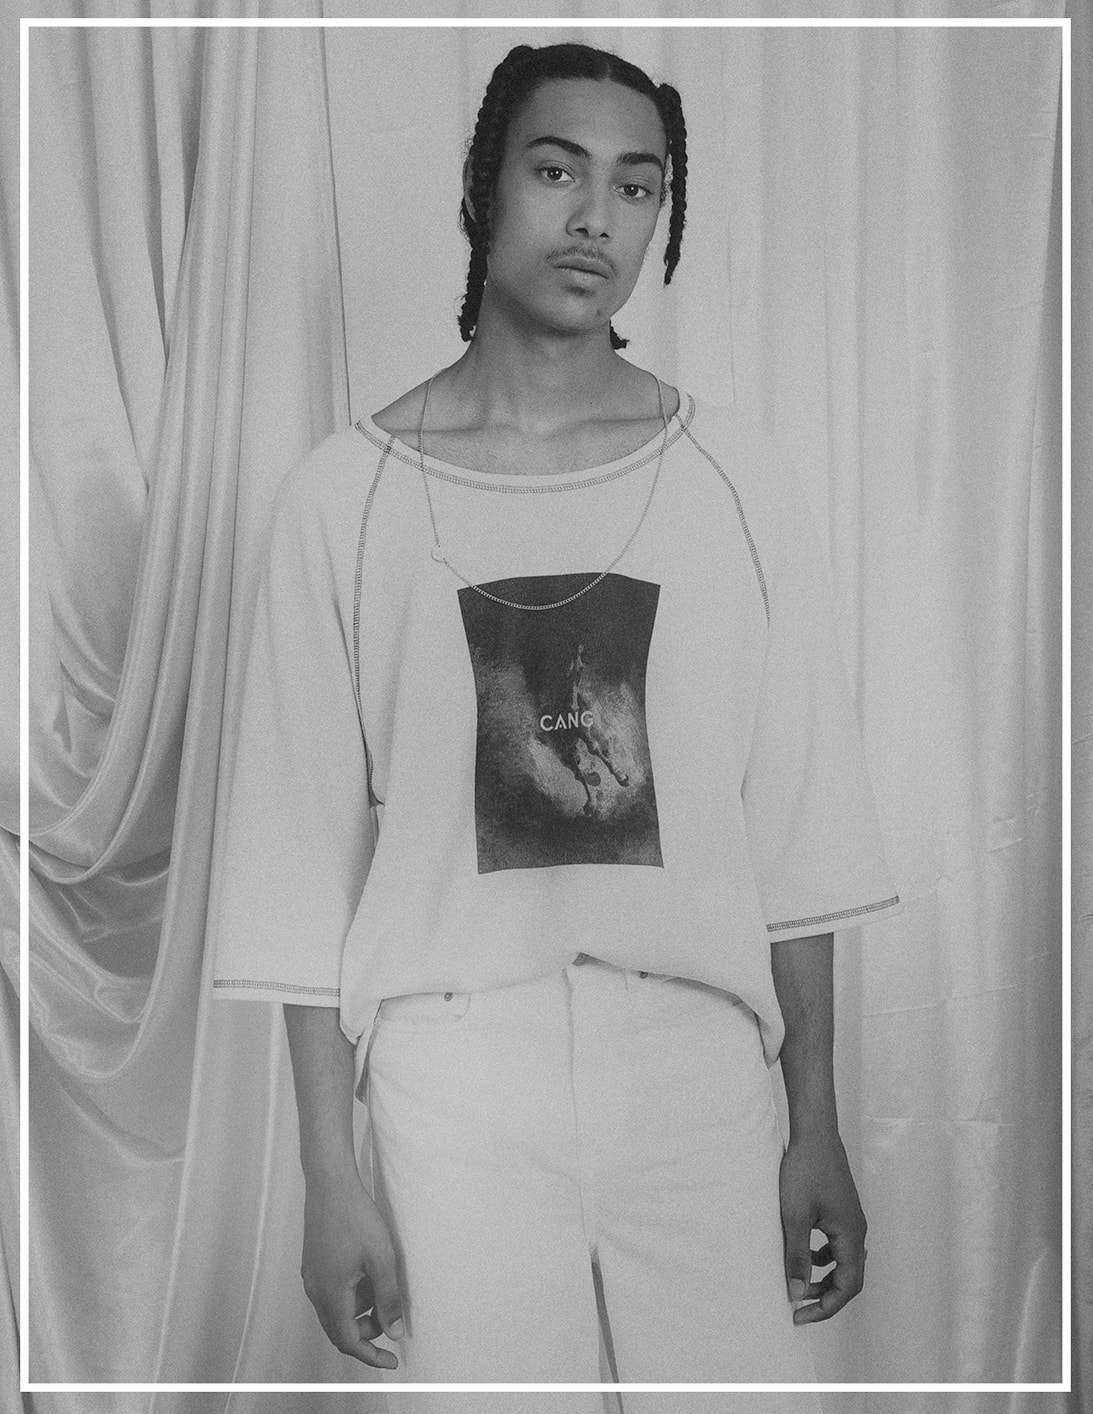 CANG 2018 Lookbook collection rise release date info drop jemaine nwankwo Conceptual Aesthetic Neutral Garments